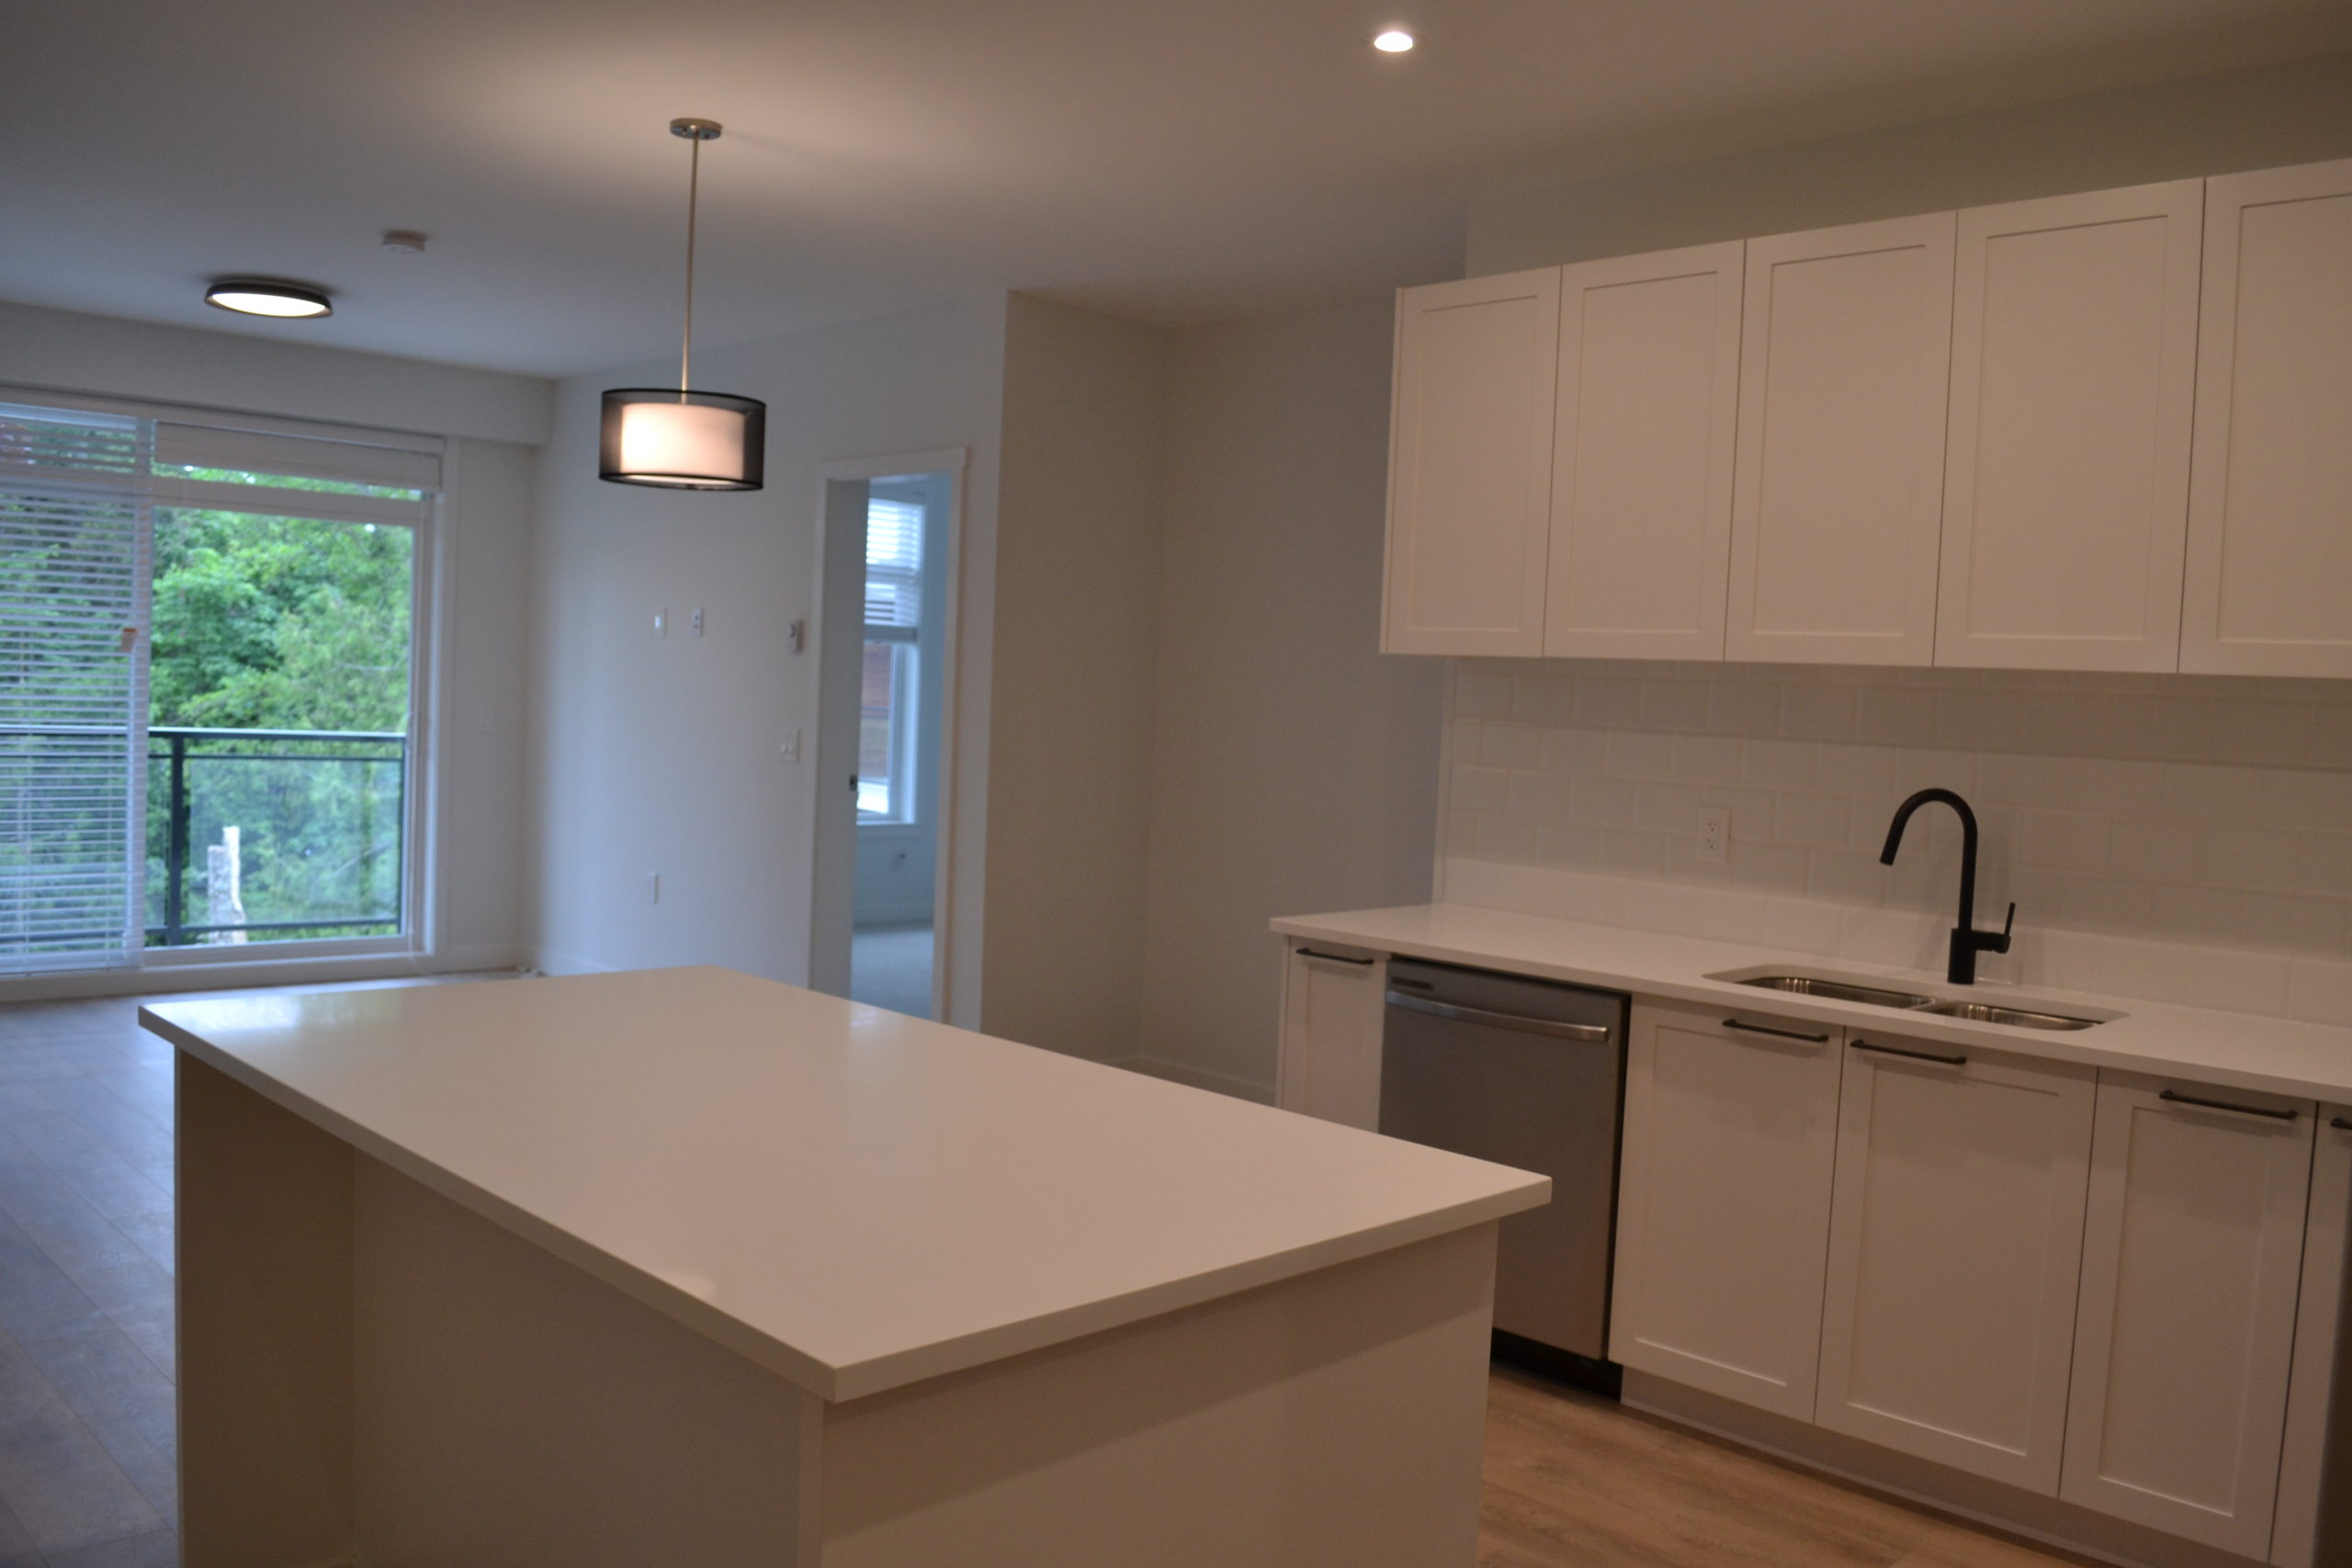 1 year old Audley Langley 2 bdrm & Den Condo